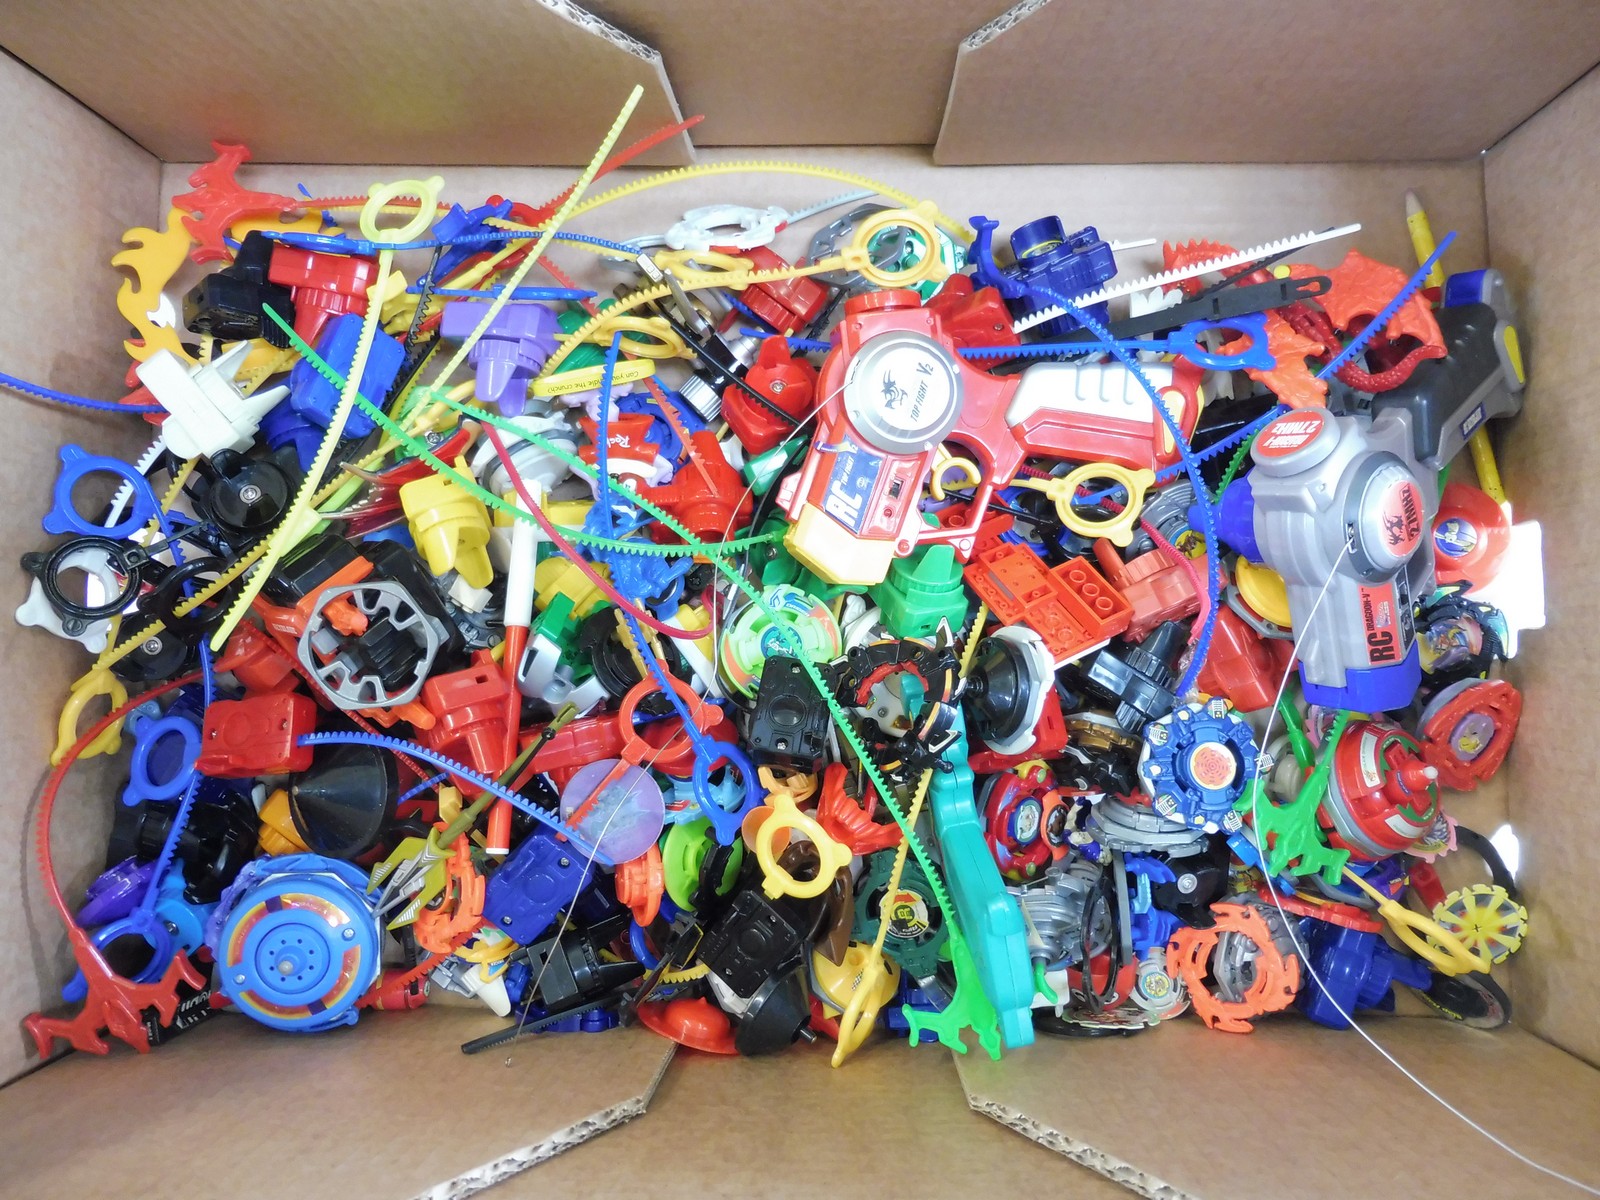 A large quantity of radio controlled Top Flight plastic spinners.